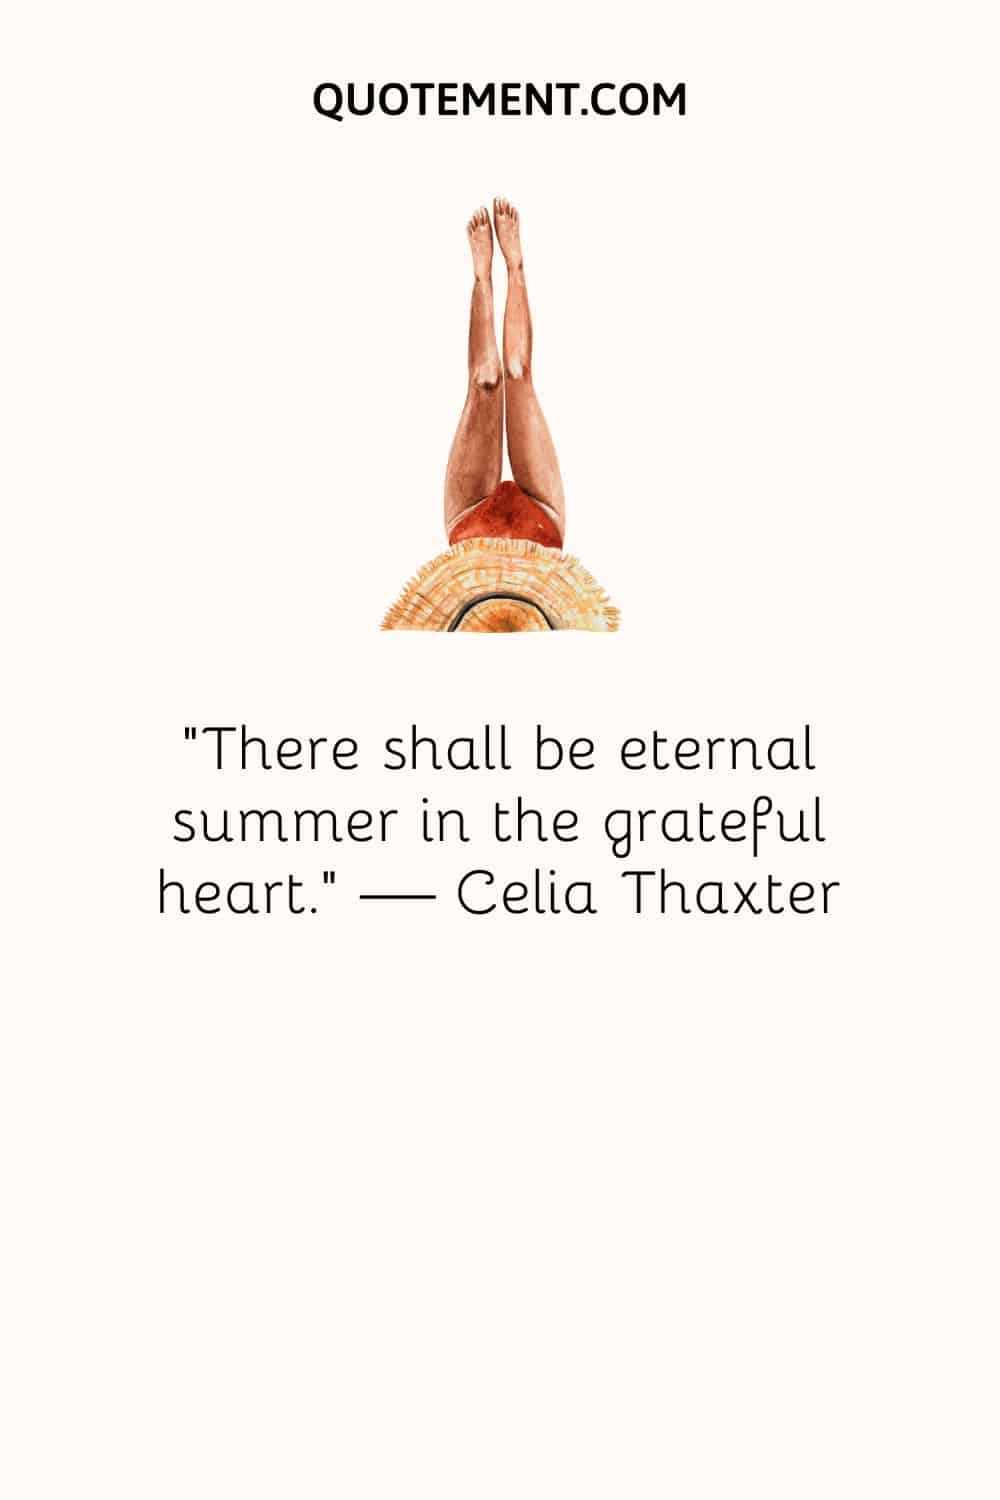 There shall be eternal summer in the grateful heart.